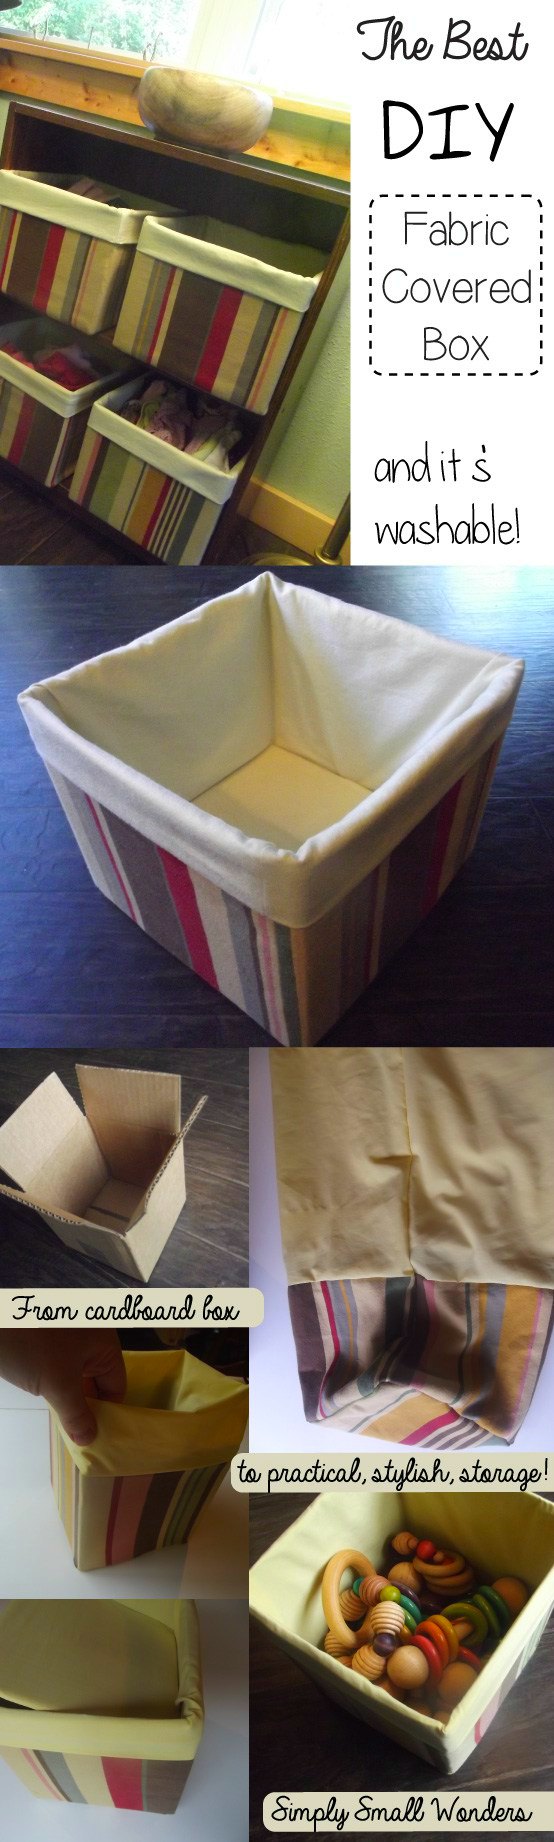 Fabric covered boxes with removable covers. Quick, cheap, easy storage ideas using a regular cardboard box.